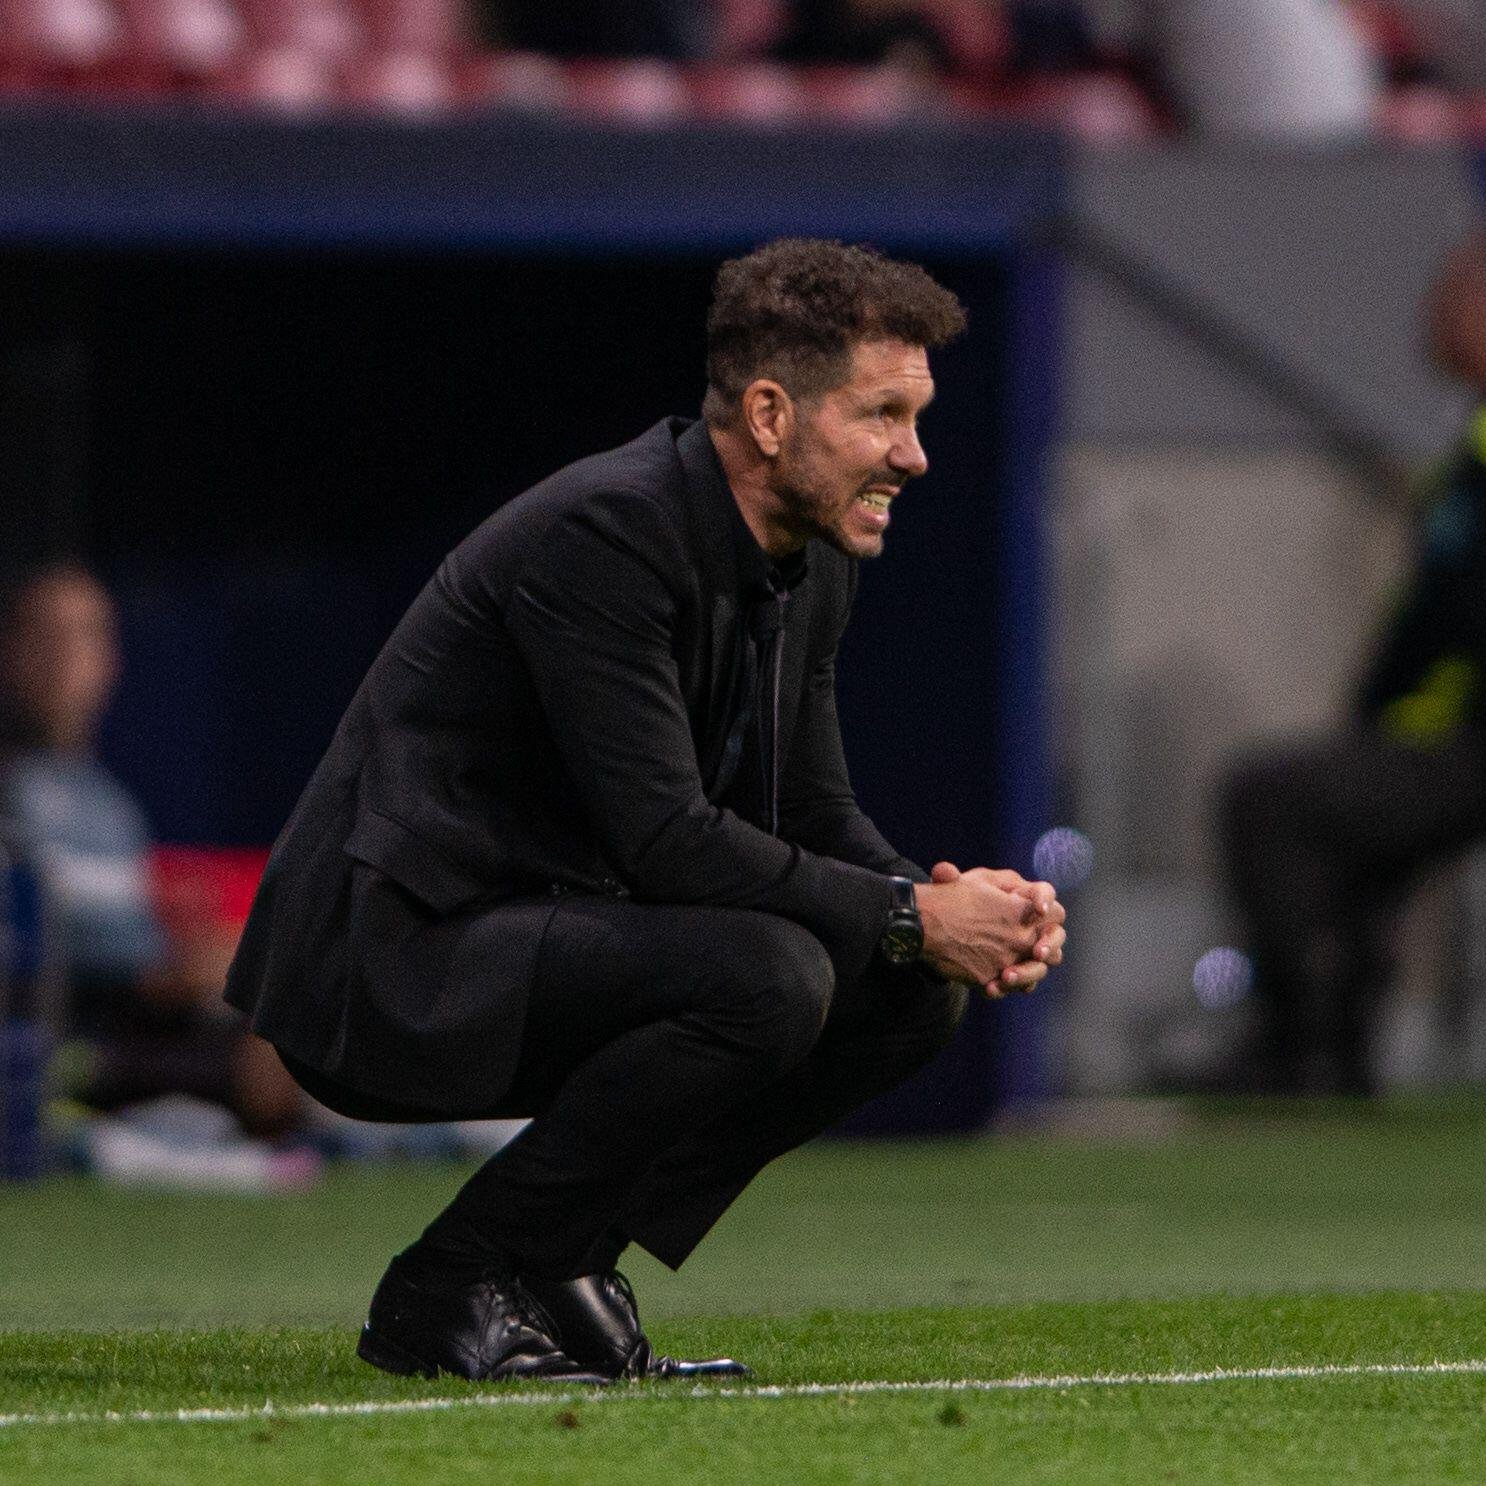 ‘But nobody cares about that’ – Diego Simeone furious with Real Madrid decisions